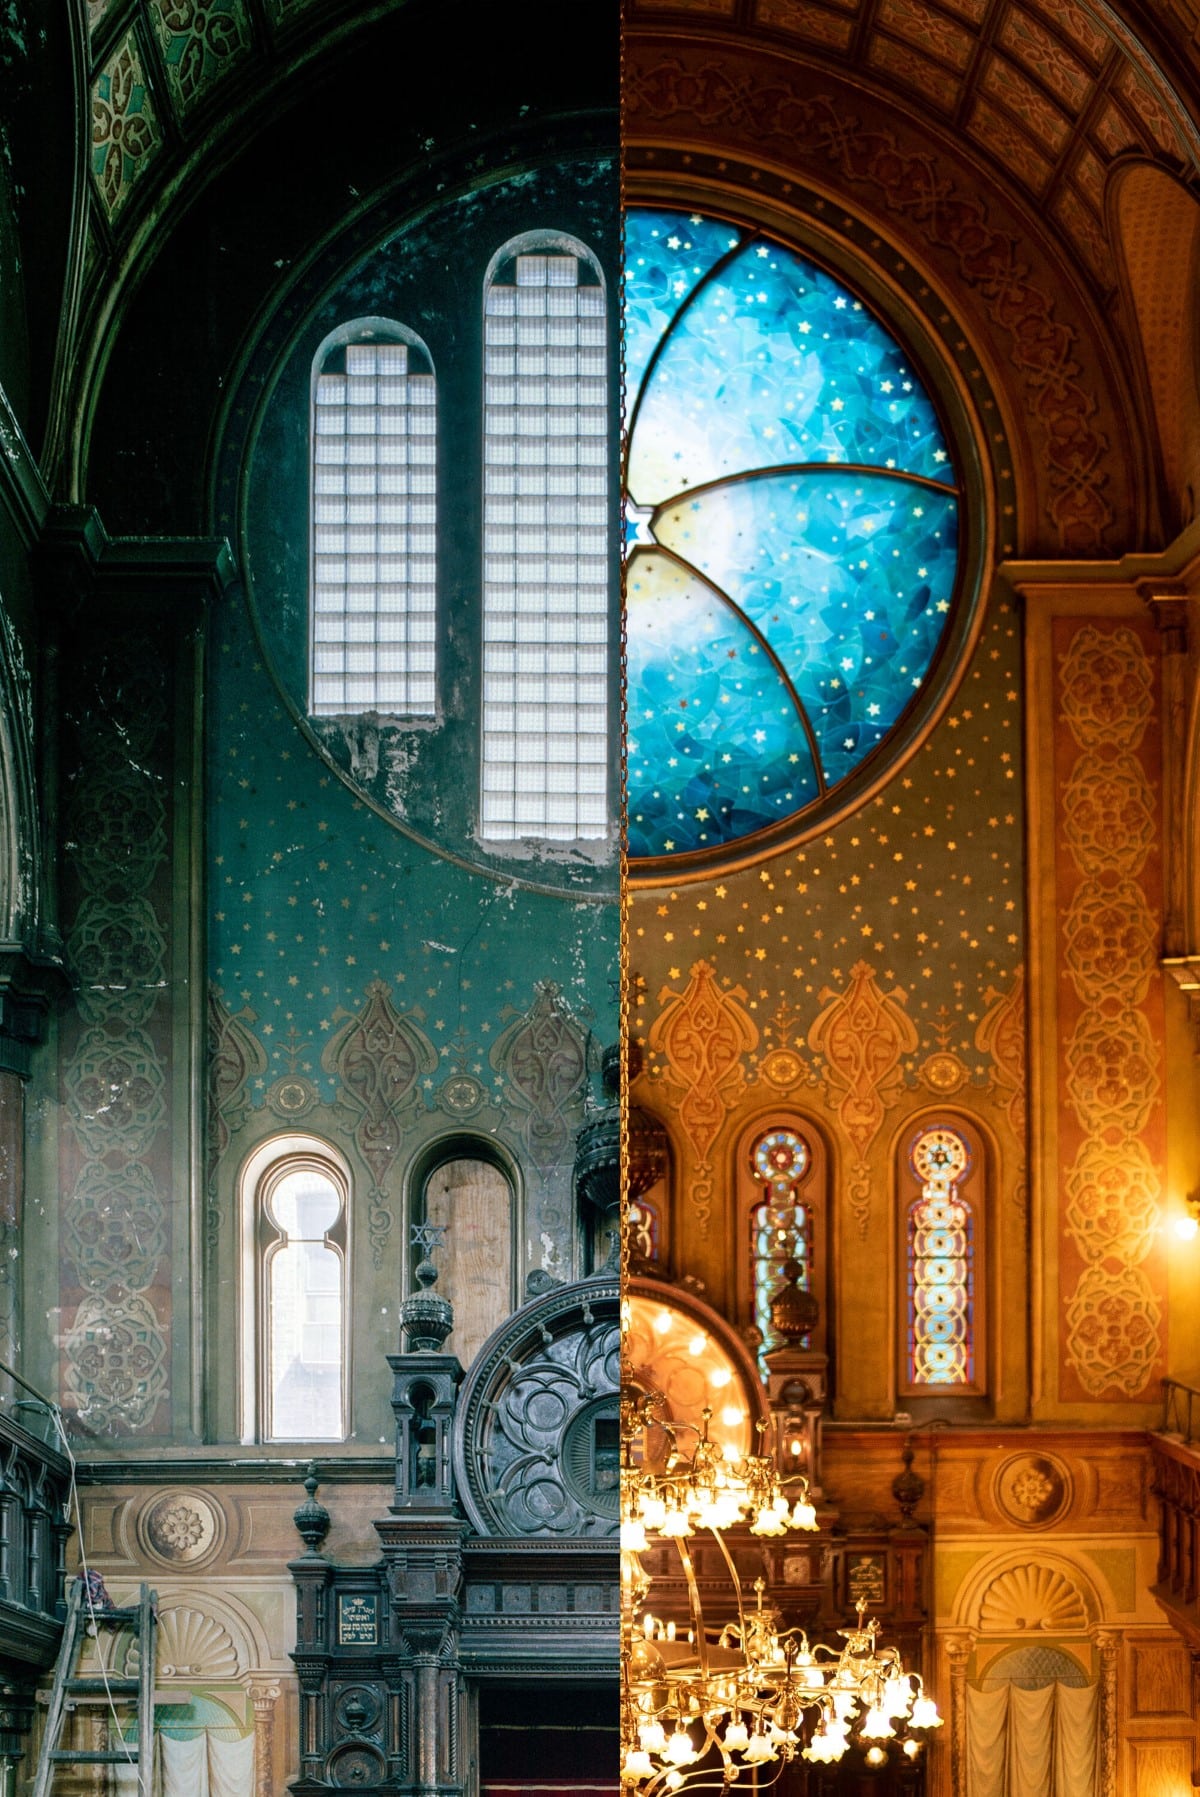 Before and after of main stained glass window at the Eldridge Street Synagogue